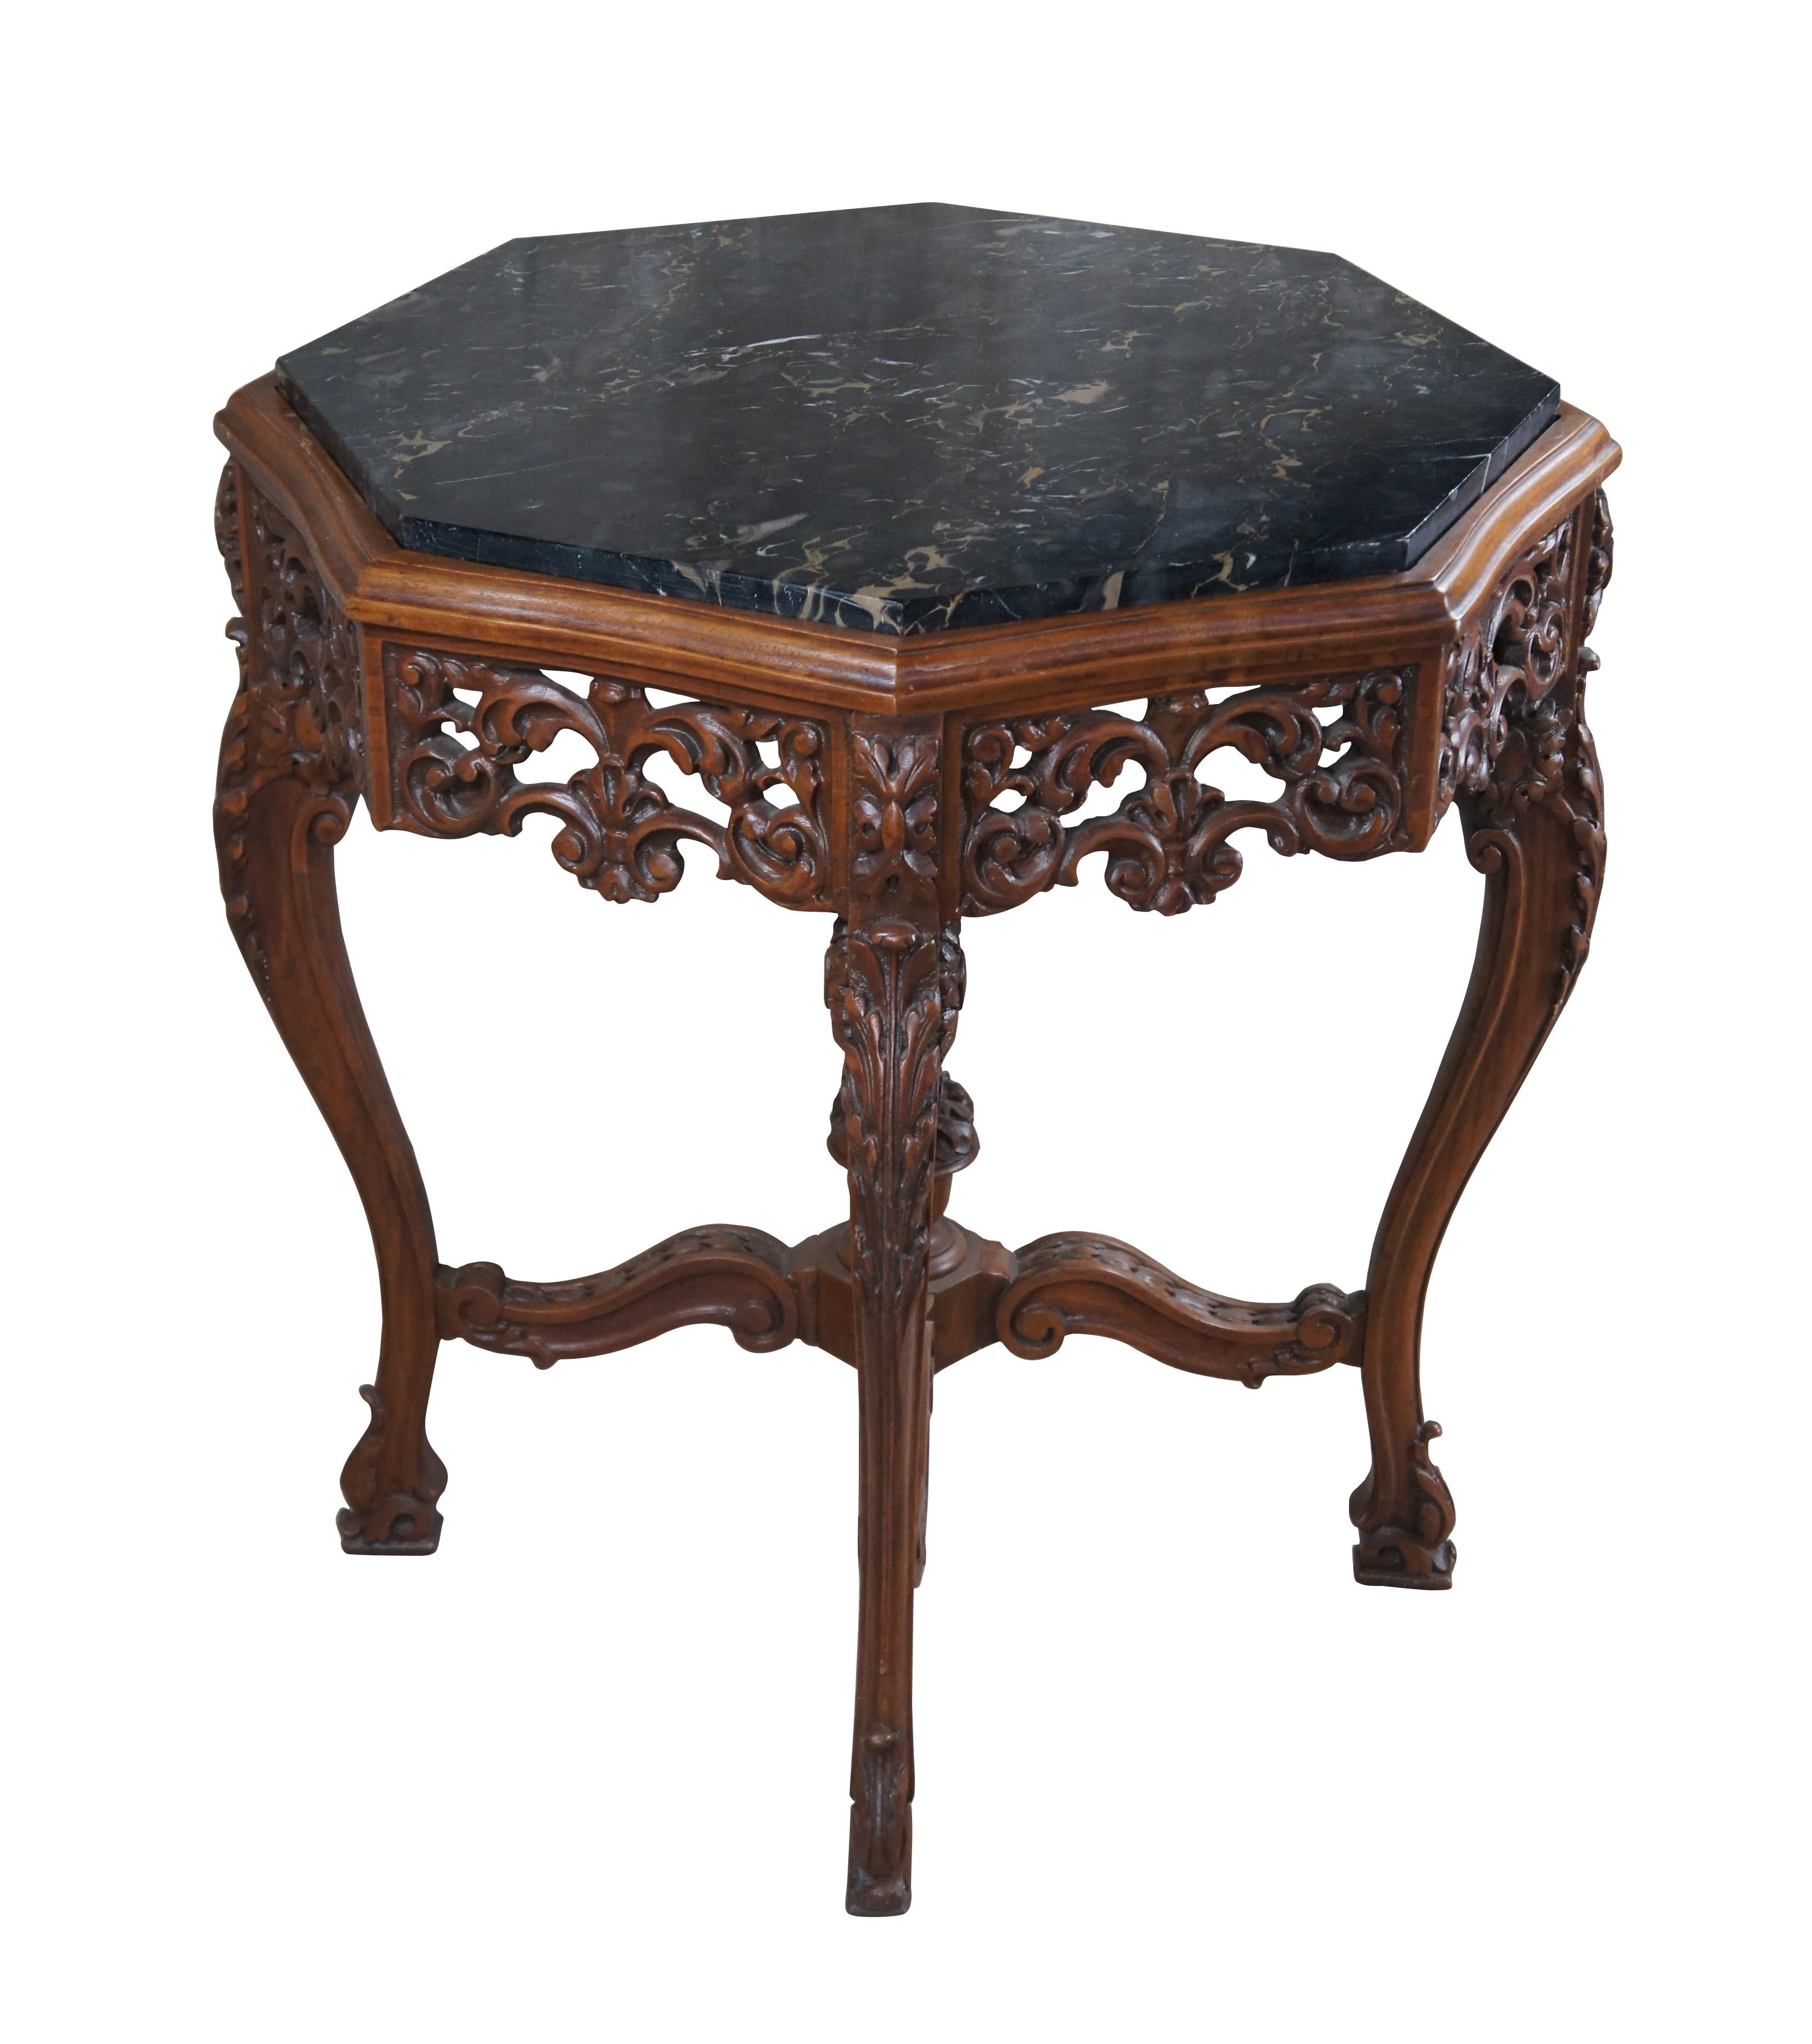 Antique Italian Renaissance center (centre) or side table. Features an octagonal frame carved from walnut with a pierced foliate apron over four acanthus carved downswept legs leading to footed and scrolled feet. The legs are connected by thick